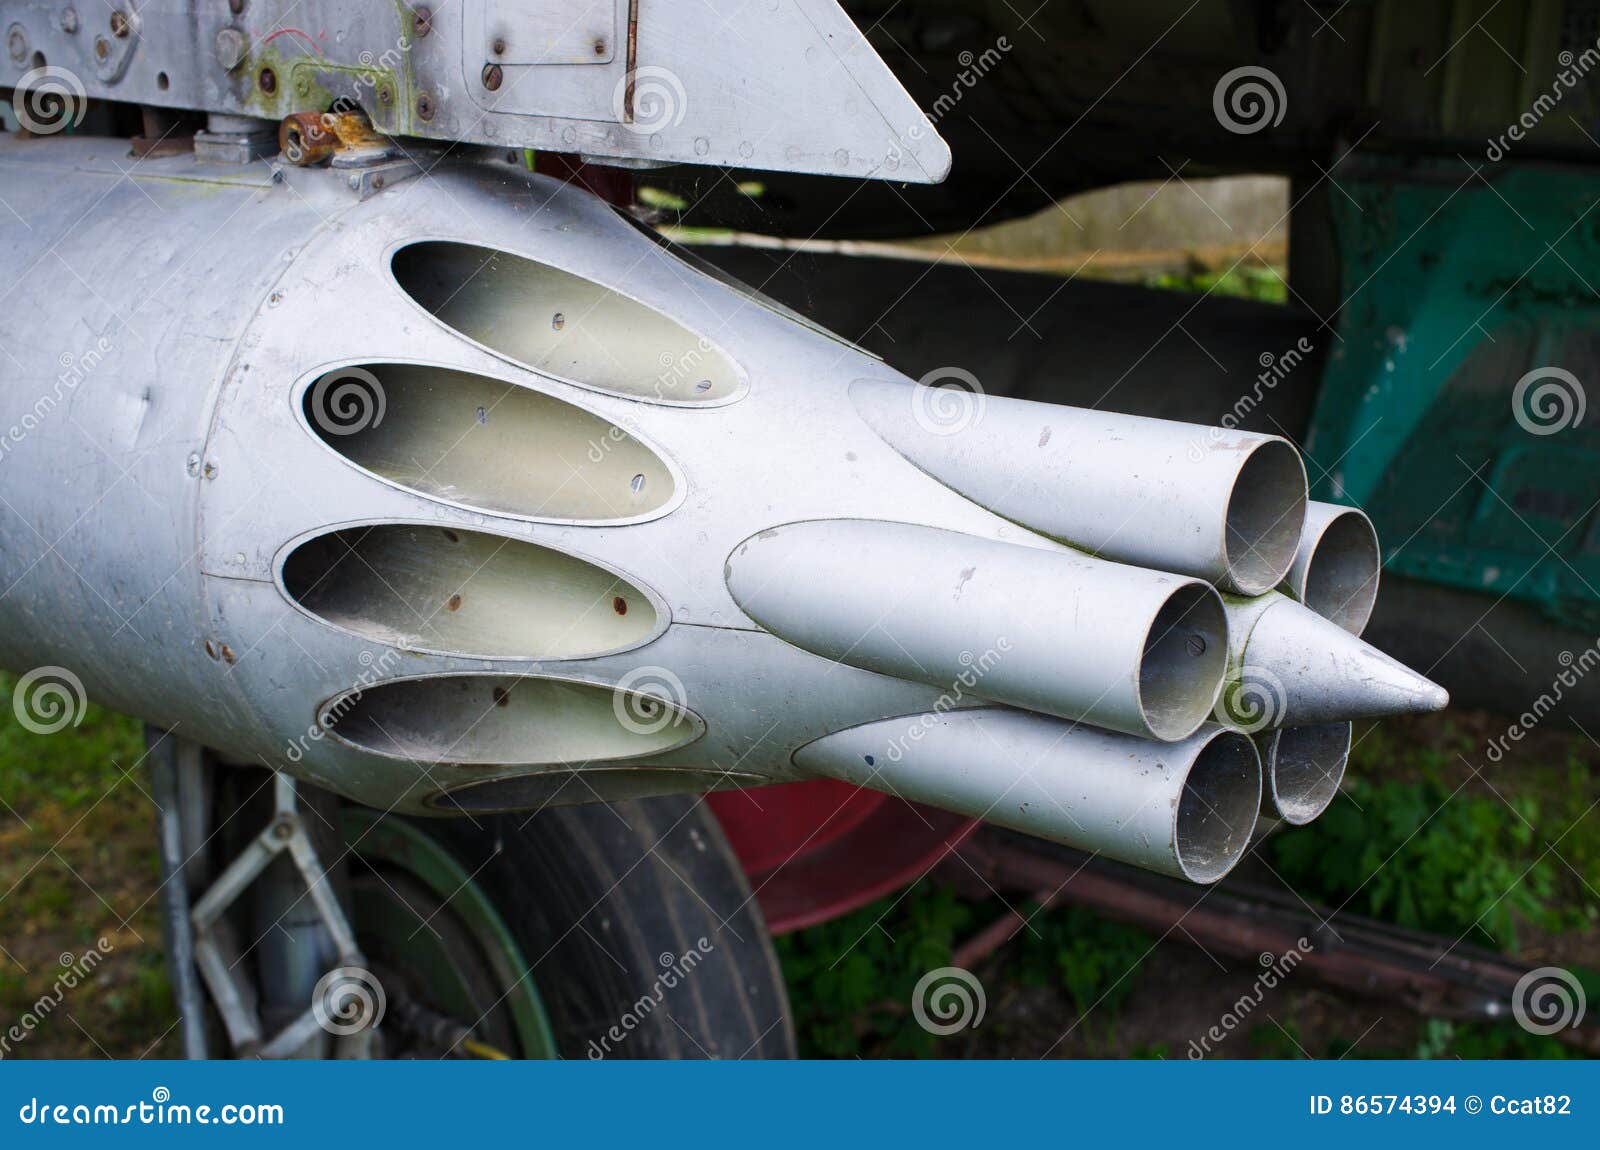 launcher of unguided missiles on the fighter